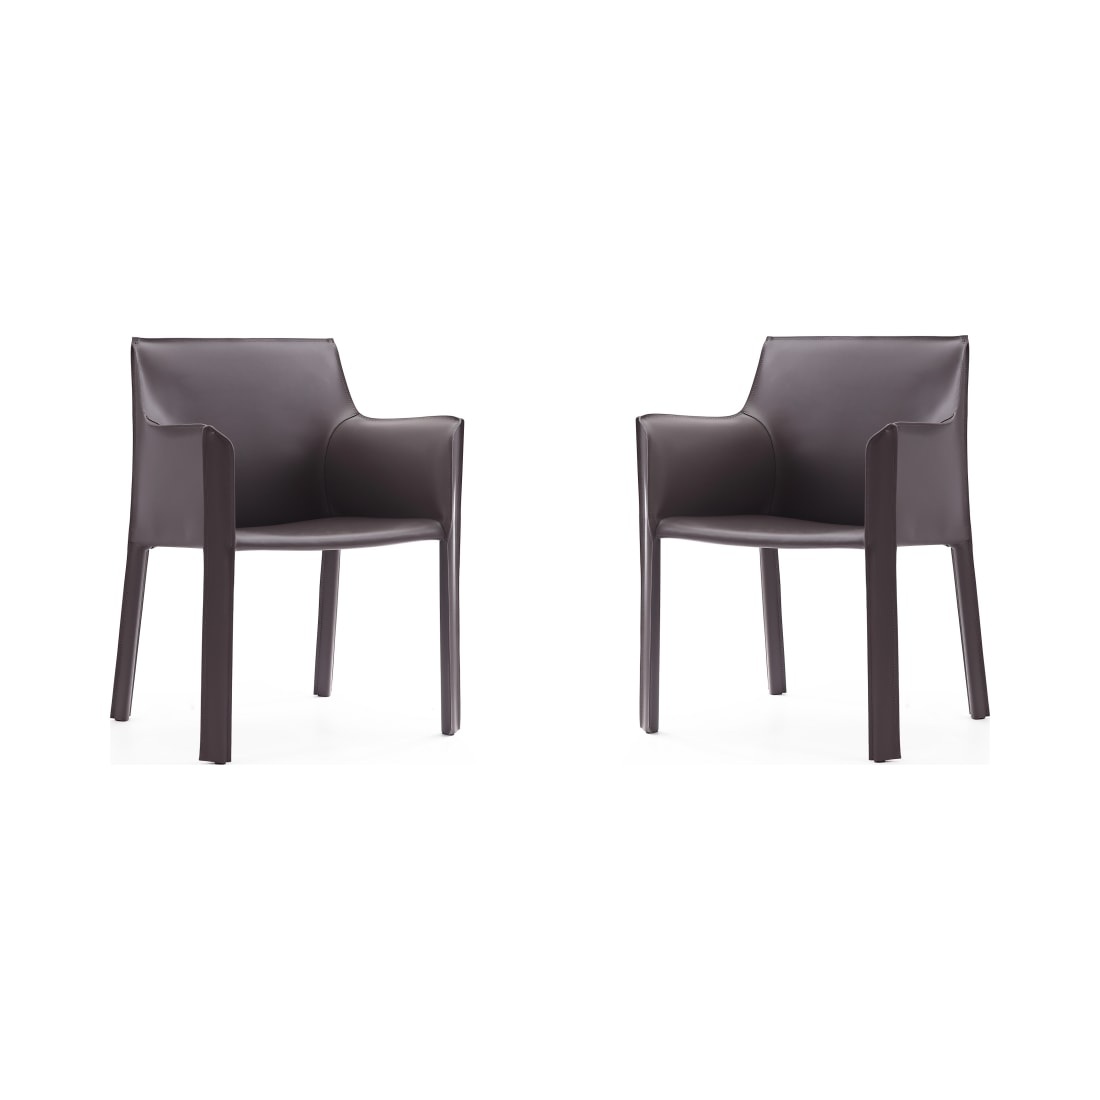 Vogue Arm Chair in Gray (Set of 2)